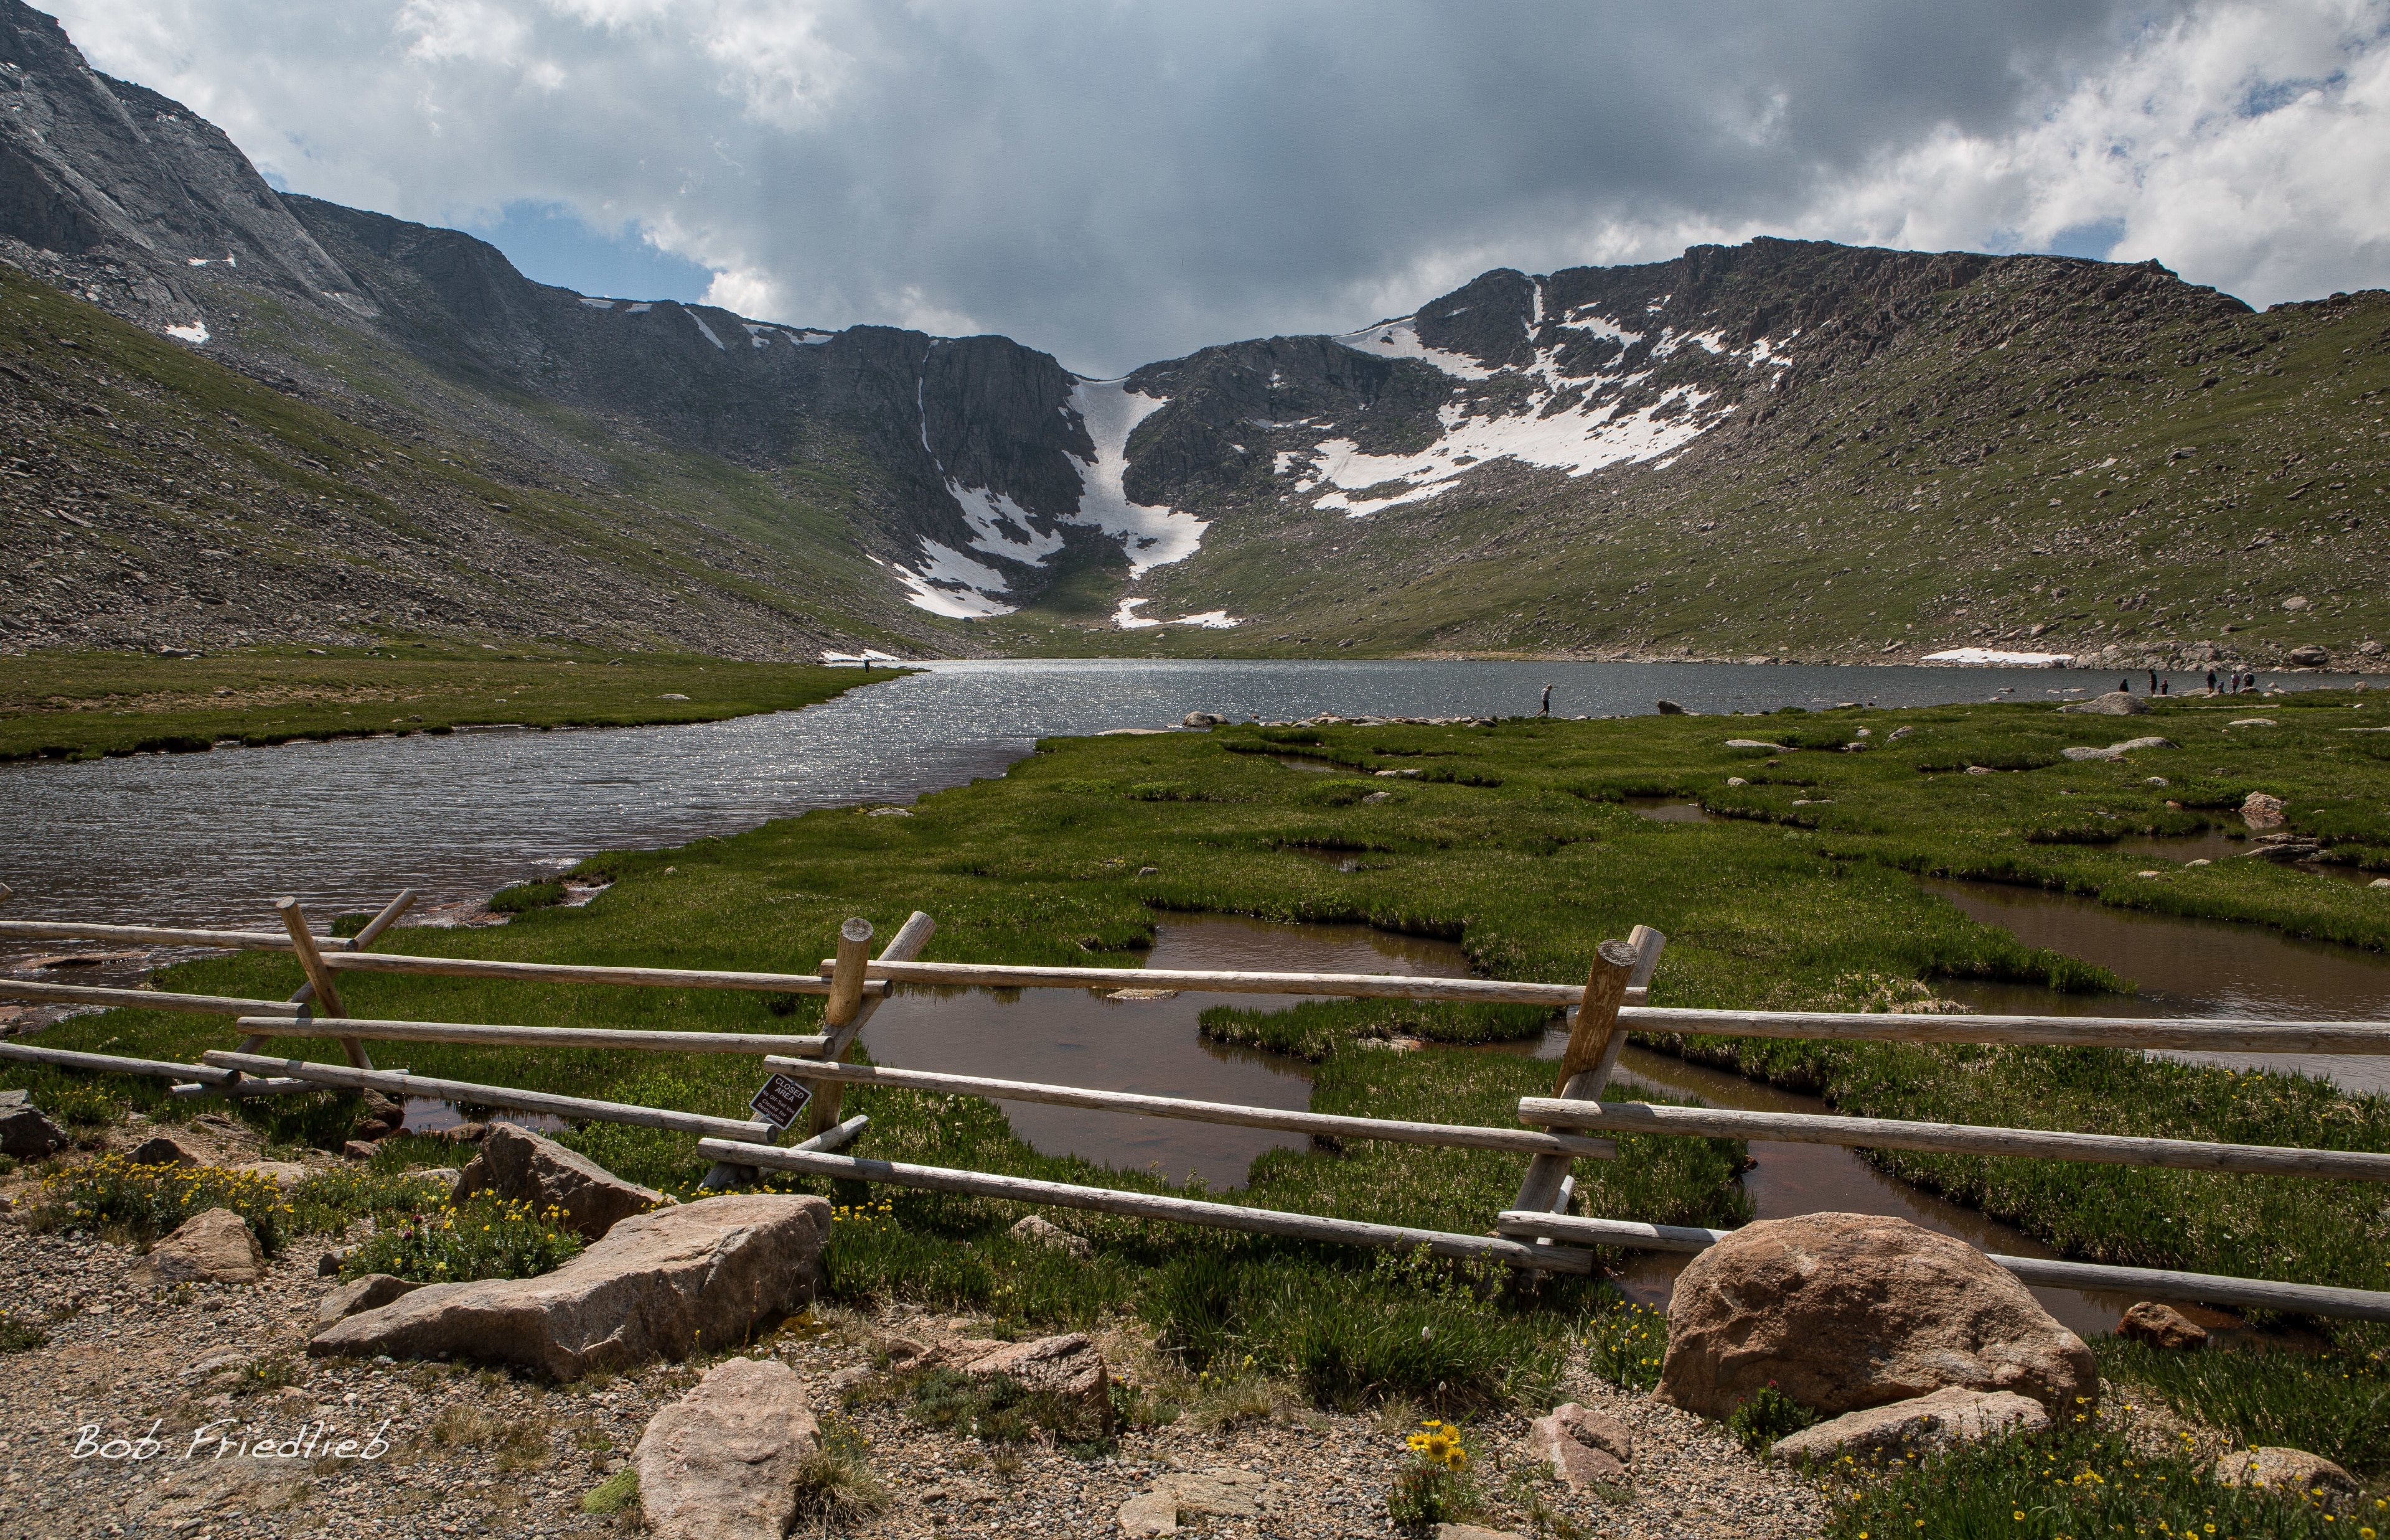 Shot this on the way back from Mount Evans Colorado. Beautiful.